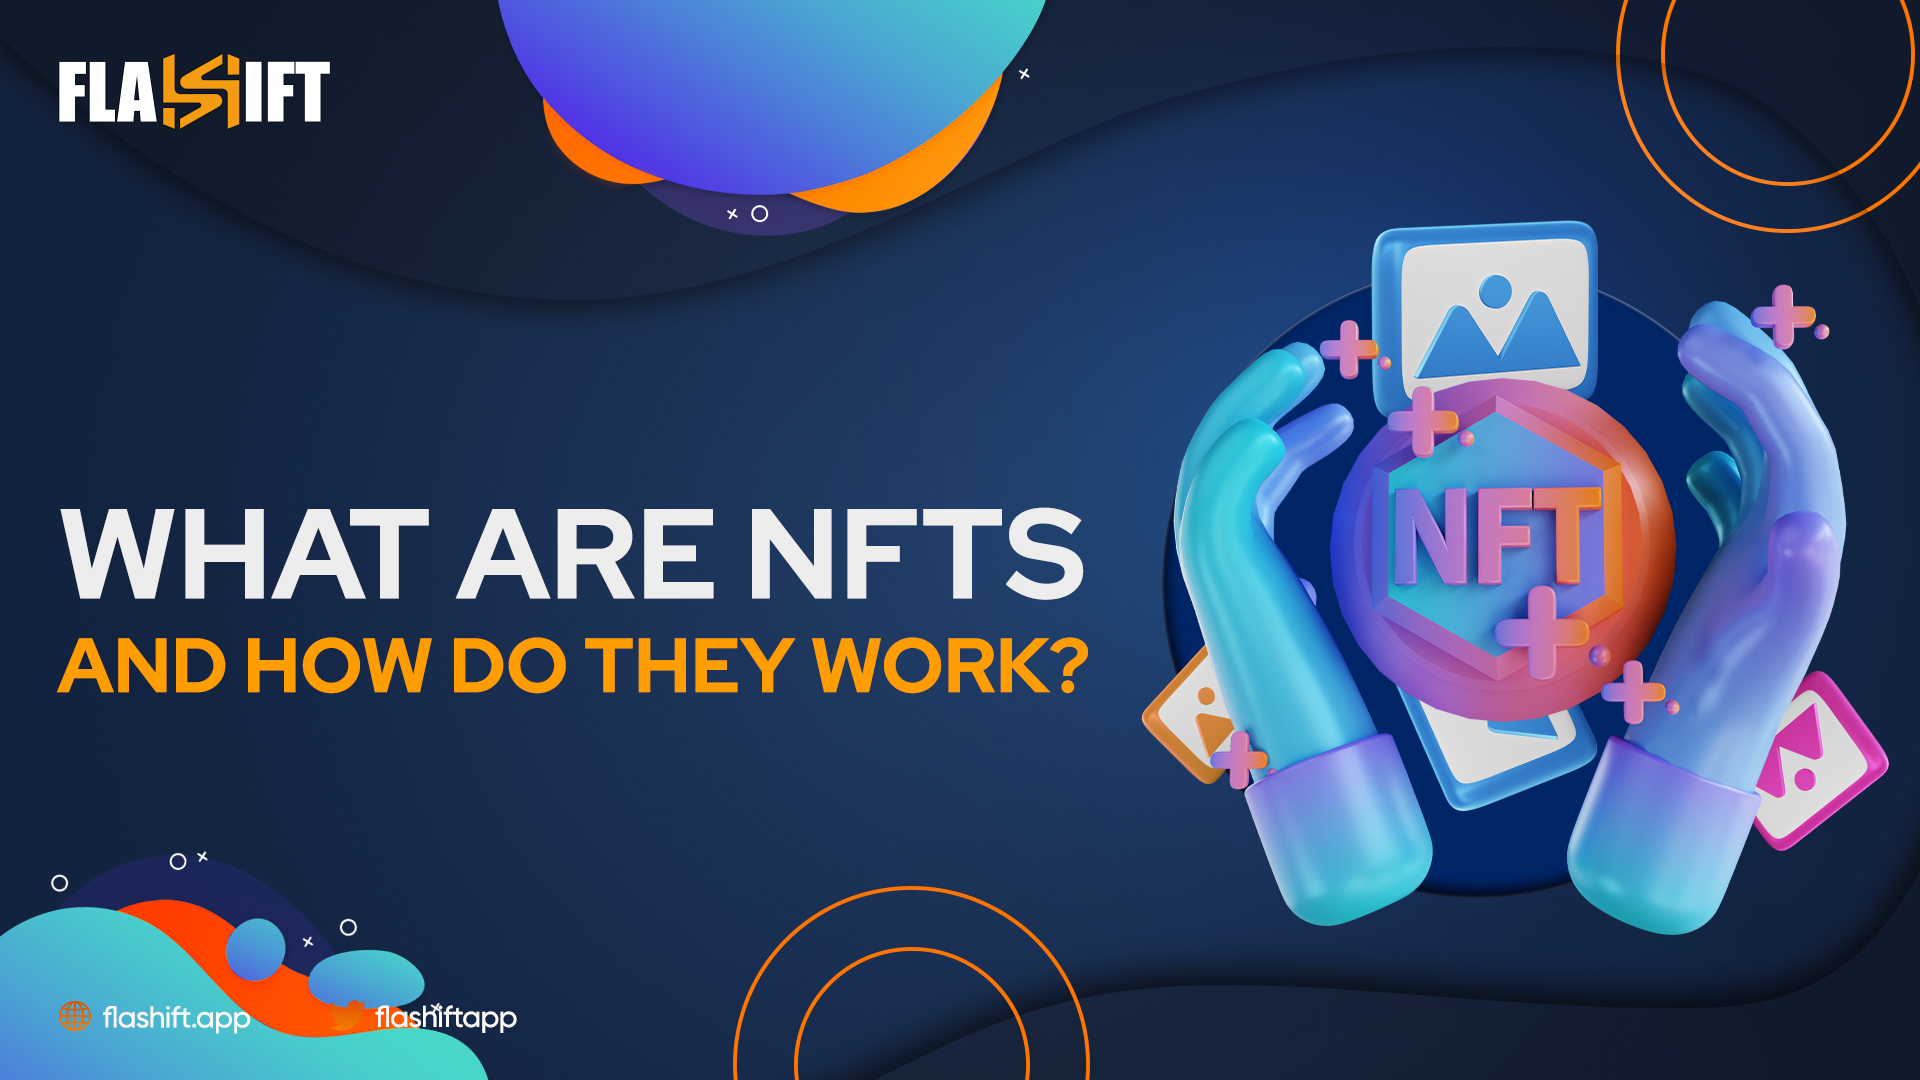 What are NFTs and how do they work?